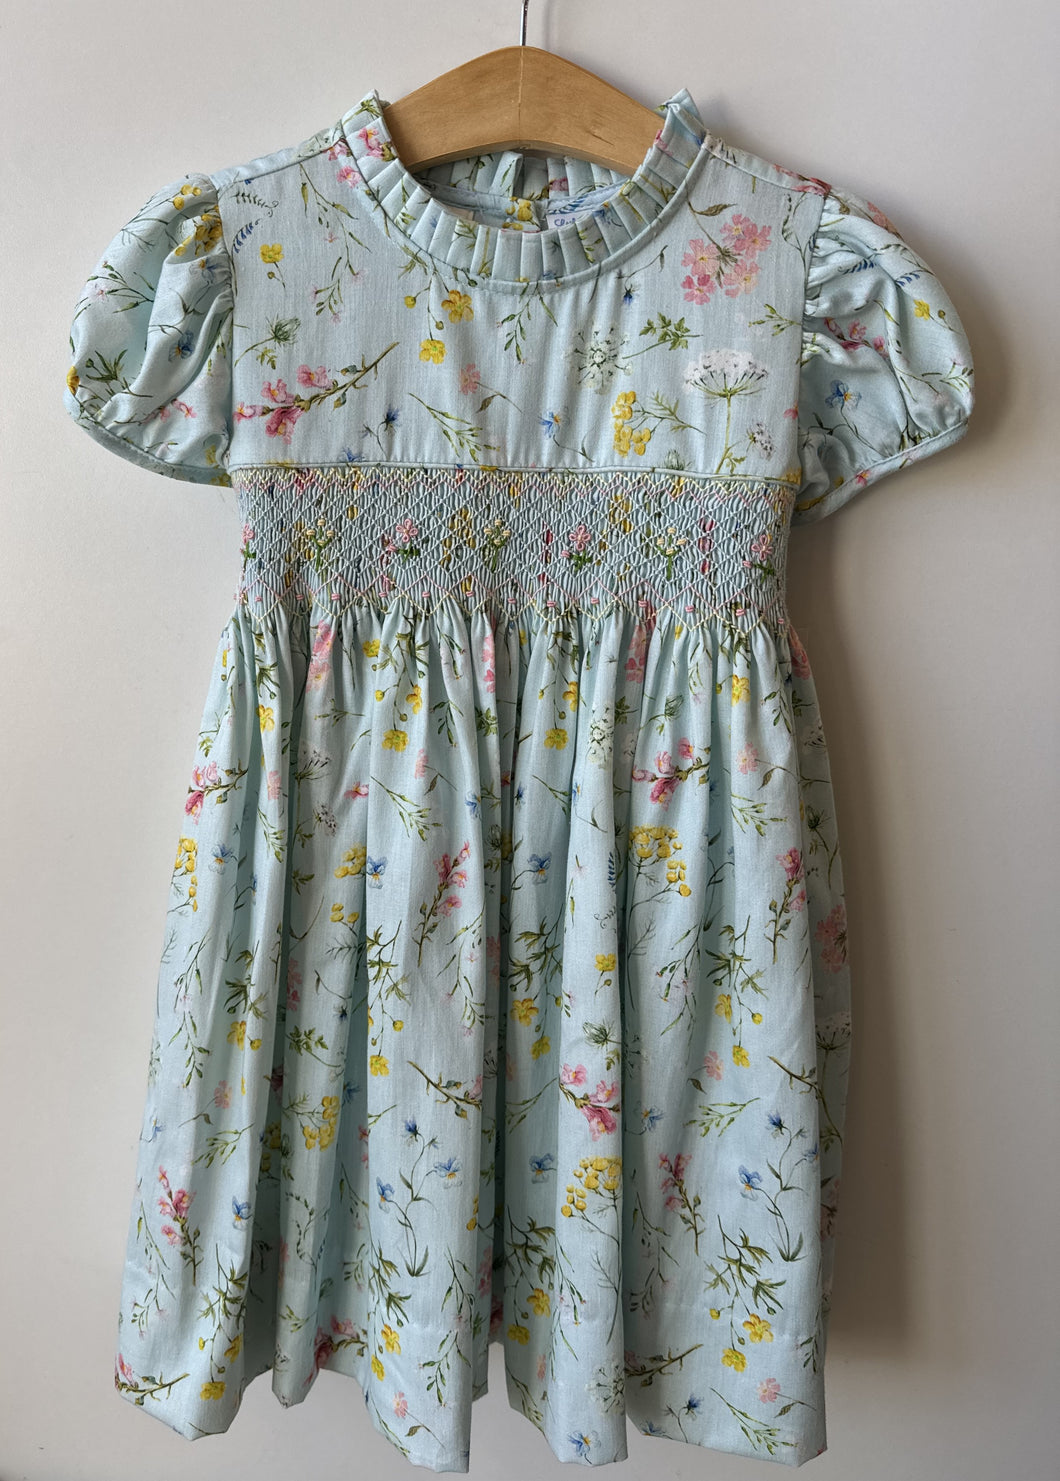 Floral Smocked Dress with Ruffle Collar